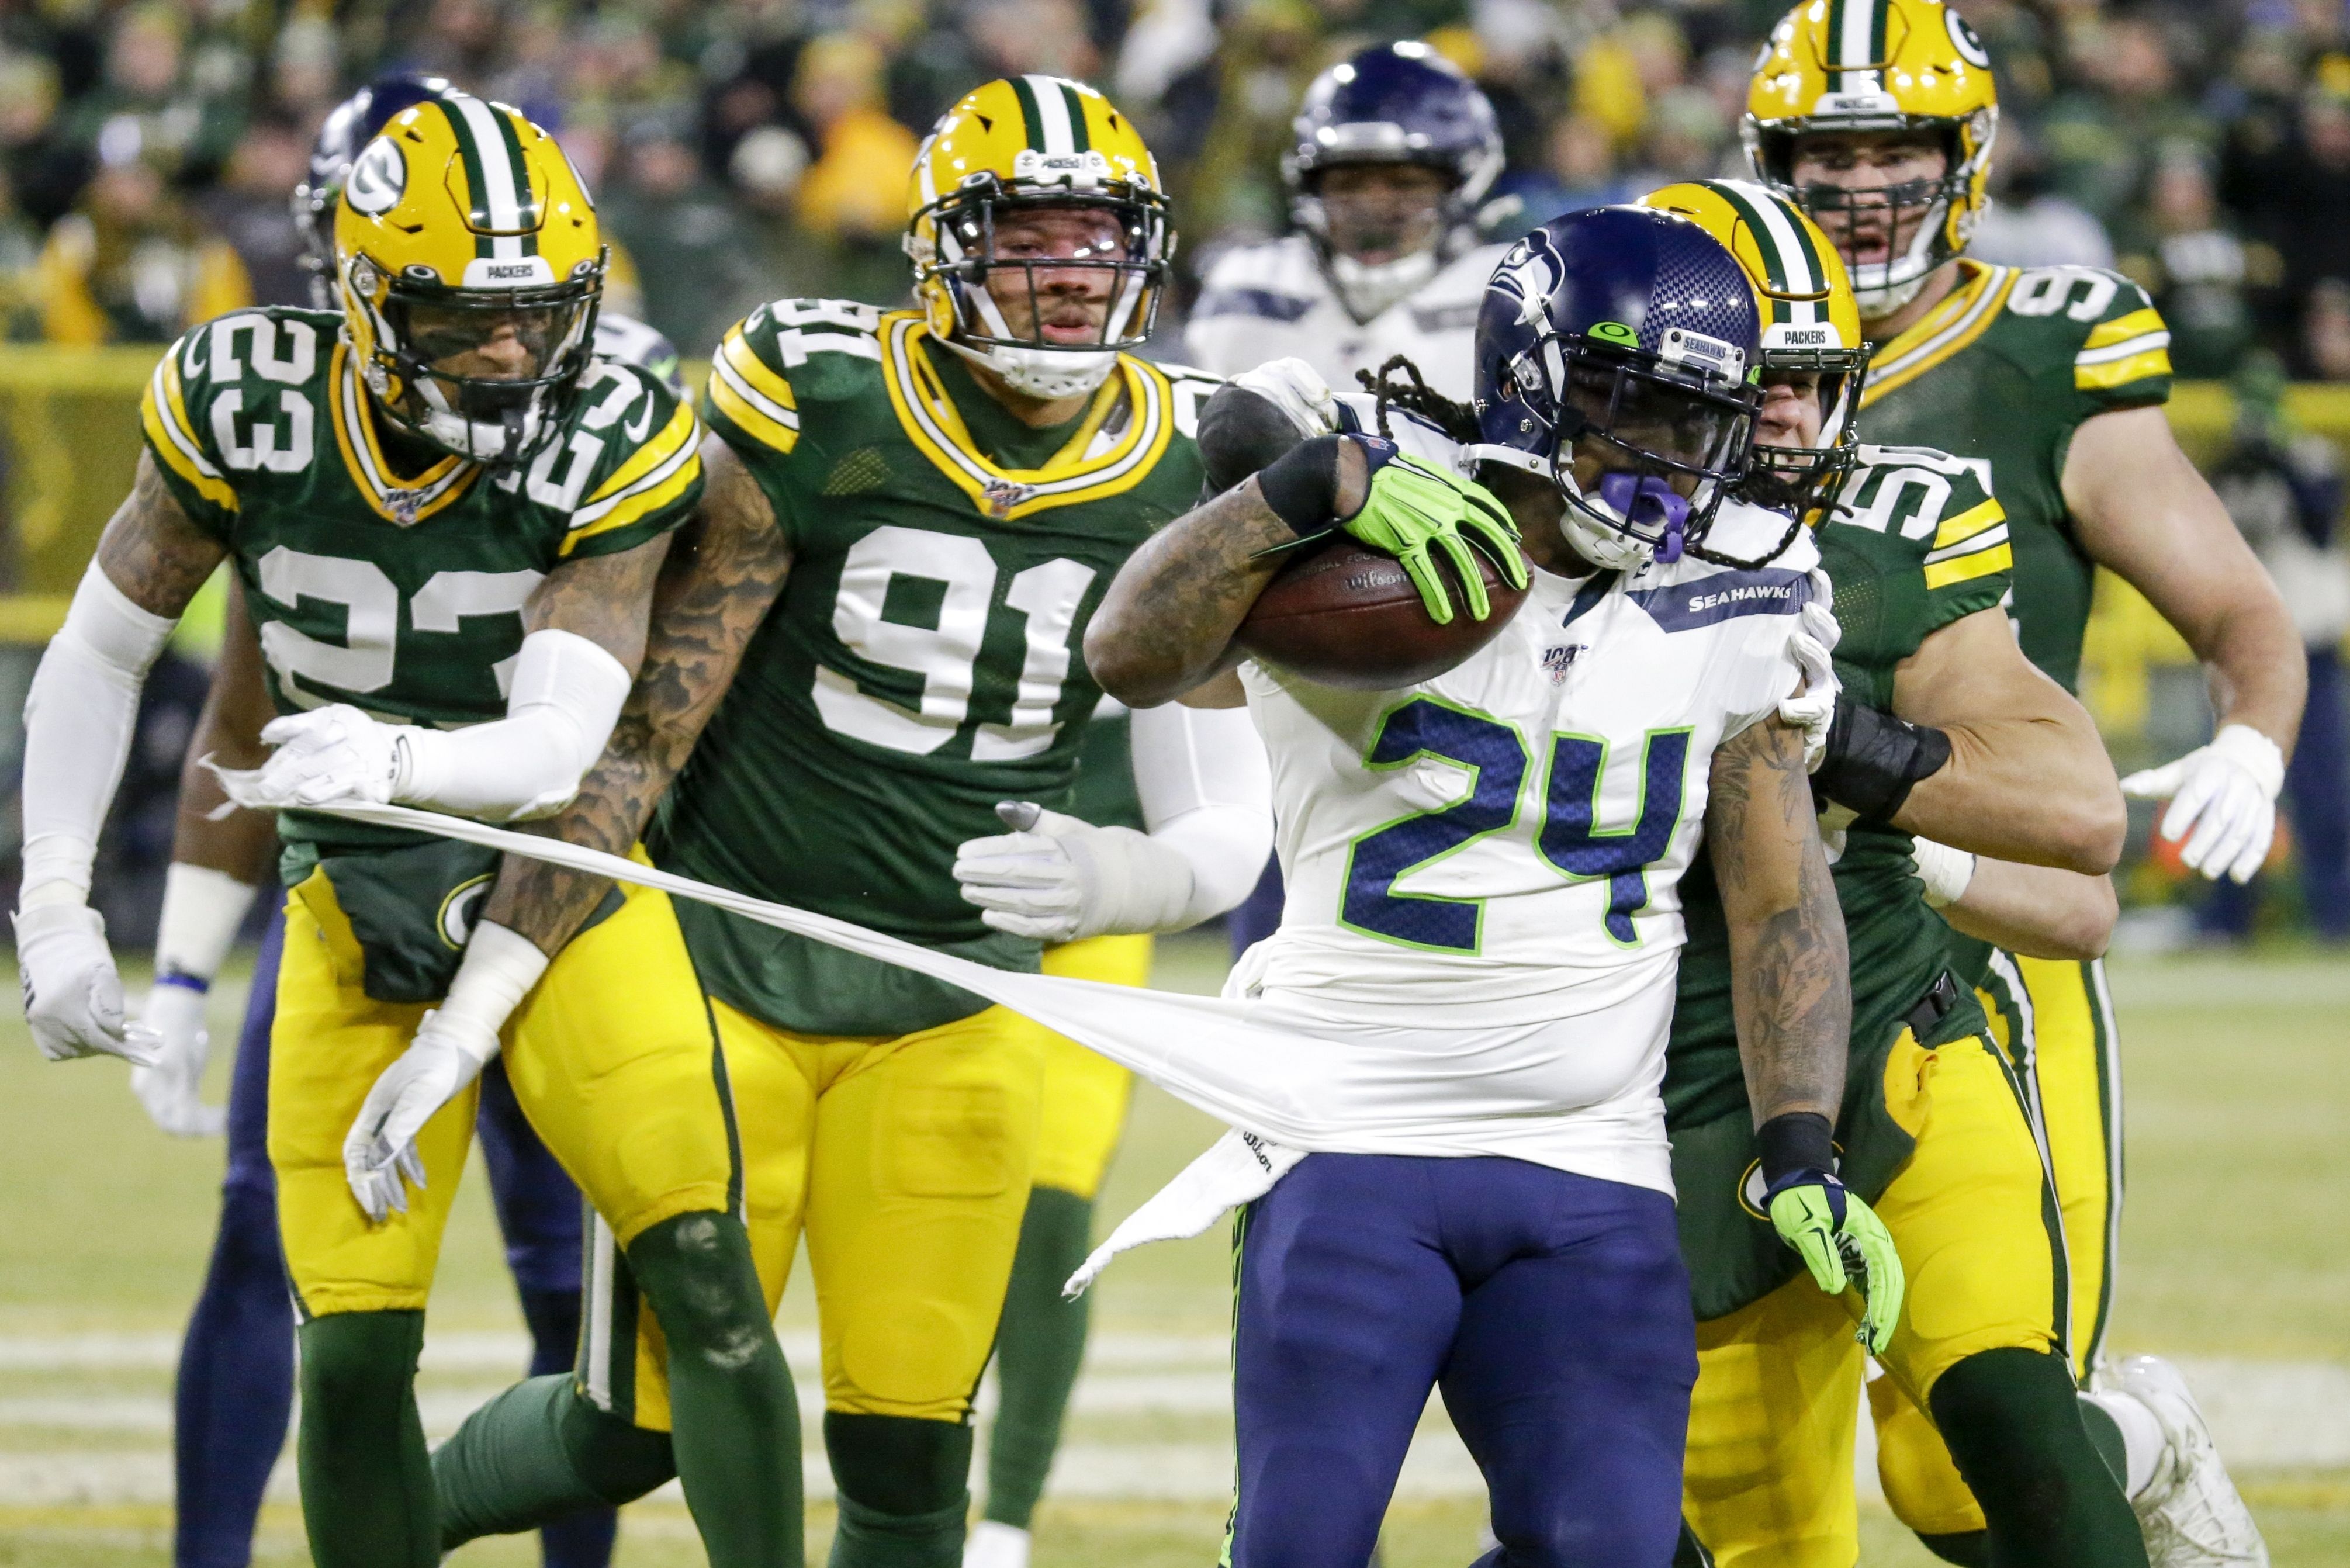 Packers wrap up preseason with 19-15 victory over Seahawks